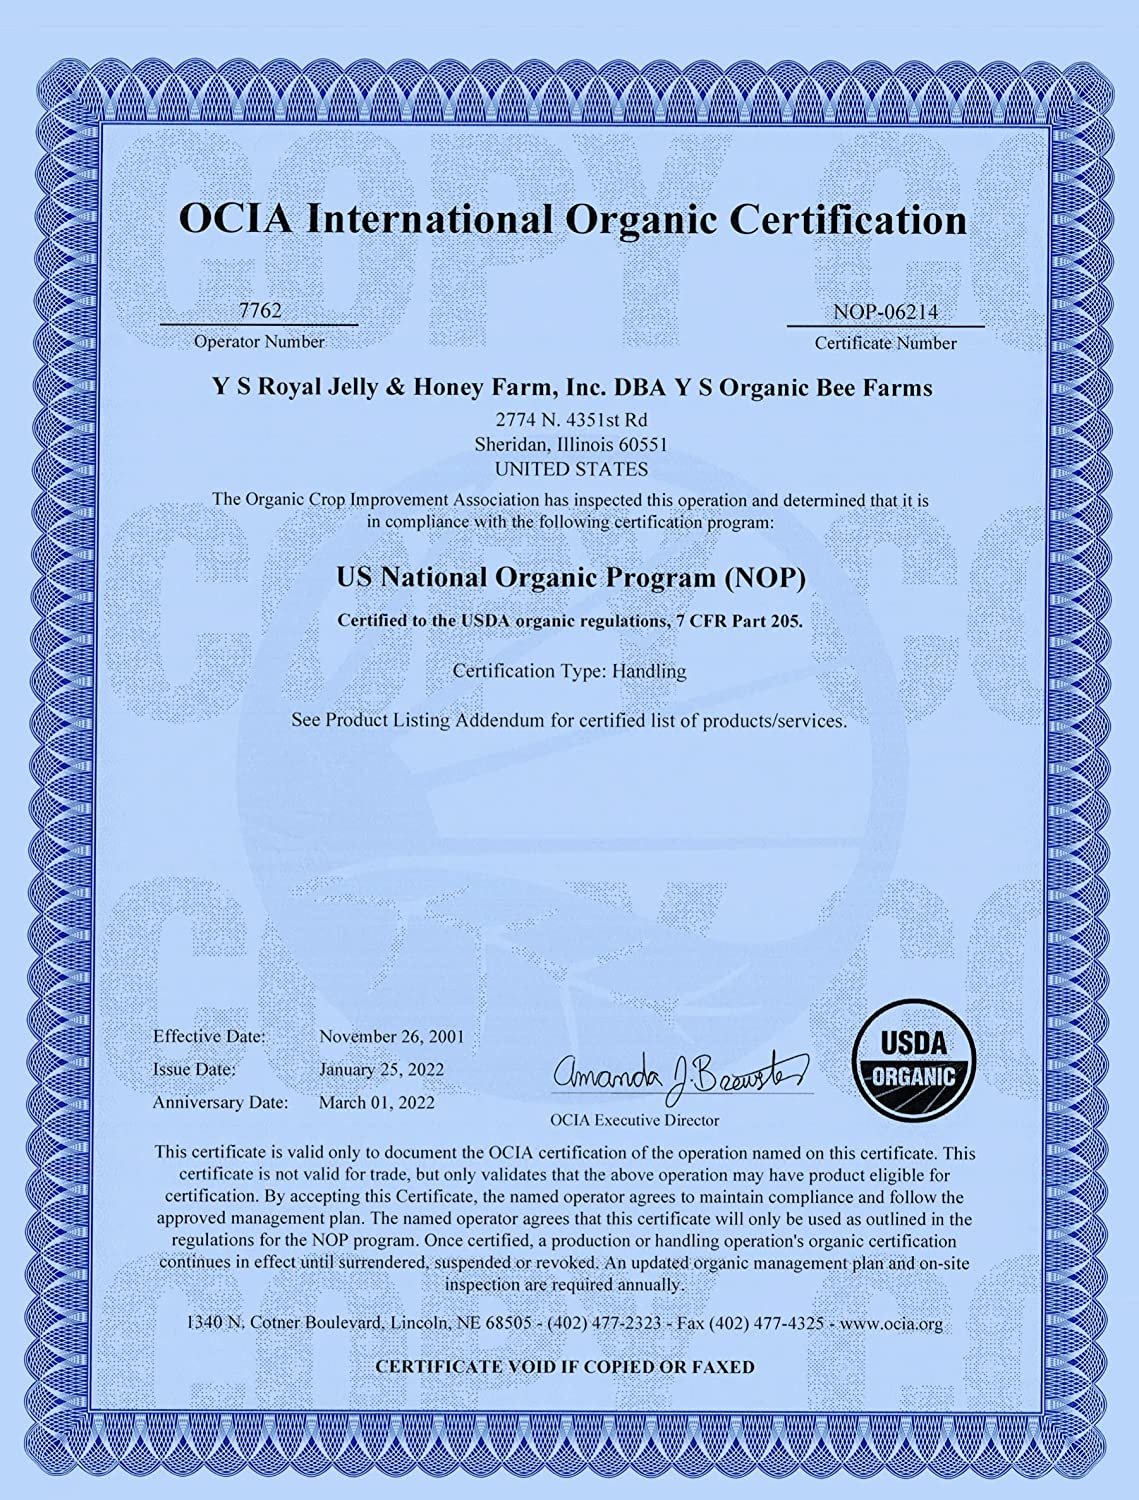 Y.S. Organic Bee Farms, 100% Certified Y.S. Organic Raw Honey, Unpasteurized, Unfiltered, Fresh Raw State, Kosher, Pure, Natural, Healthy, Safe, Gluten Free, Harvested with Extreme Care, 1 Lb - 6 Jars